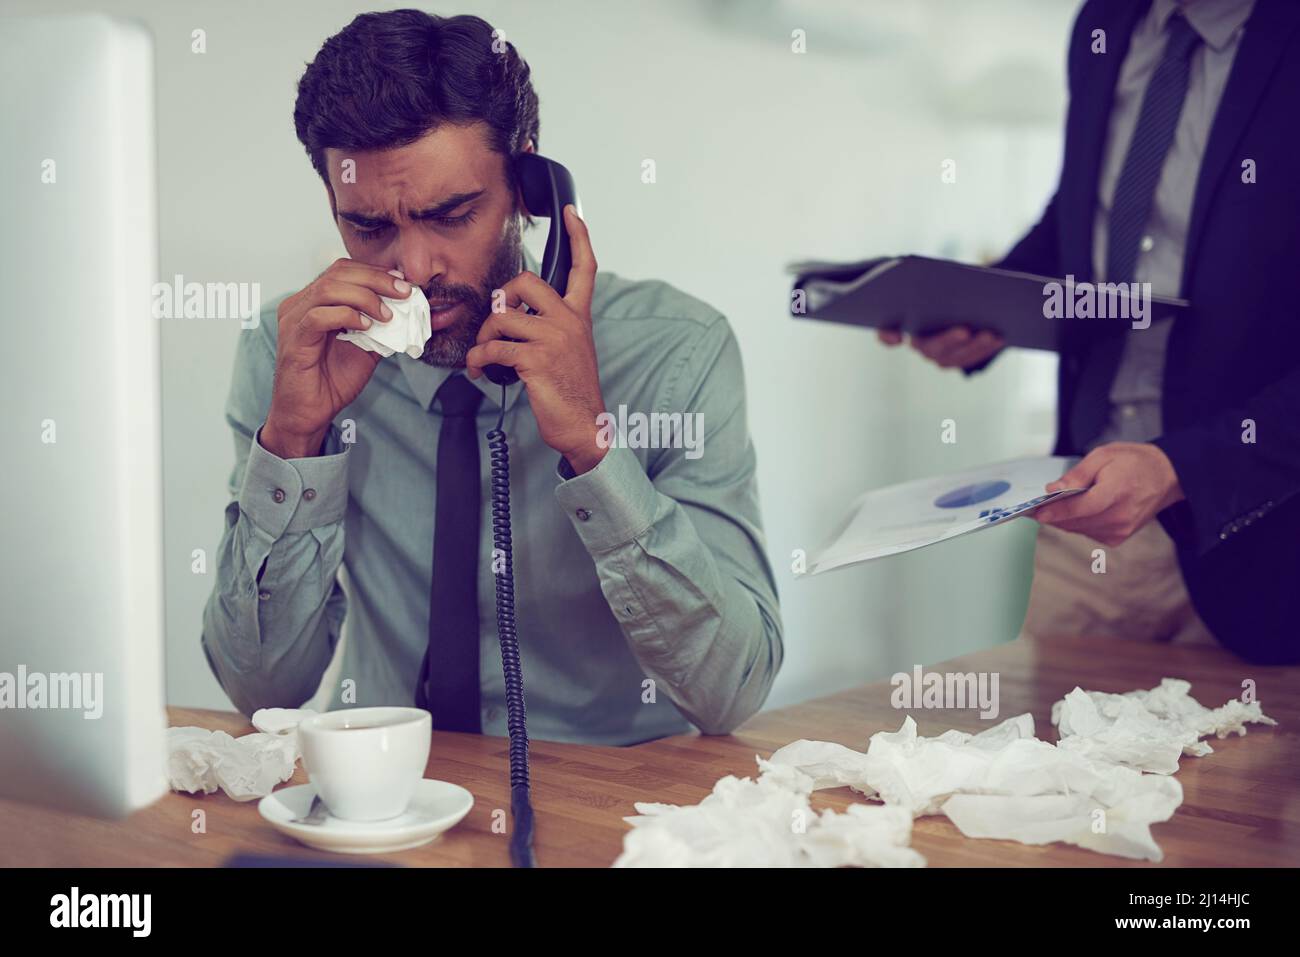 He could do with a time-out from work. Cropped shot of a businessman suffering with allergies in an office. Stock Photo